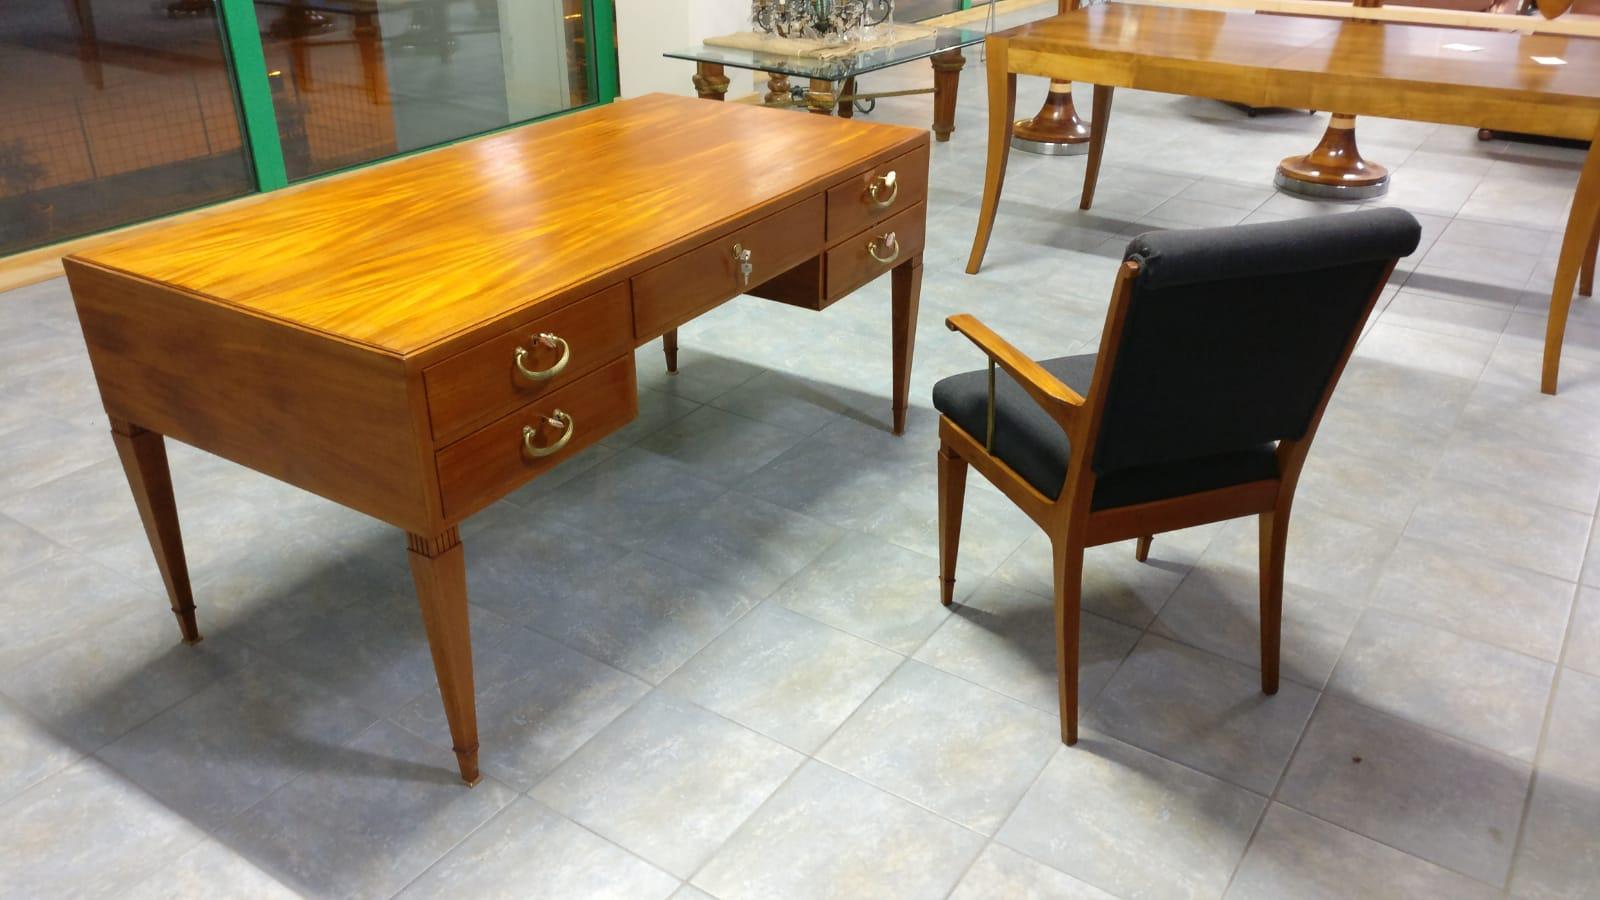 Italian midcentury desk and matching chair by Issel, circa 1950s-1960s, with brass details, probably teak wood. Size 160 cm x 80 cm, height 78 cm. armchair51 x 57 cm height 92 cm. Made in Italy. Elegant desk with matching chair with sculptural legs